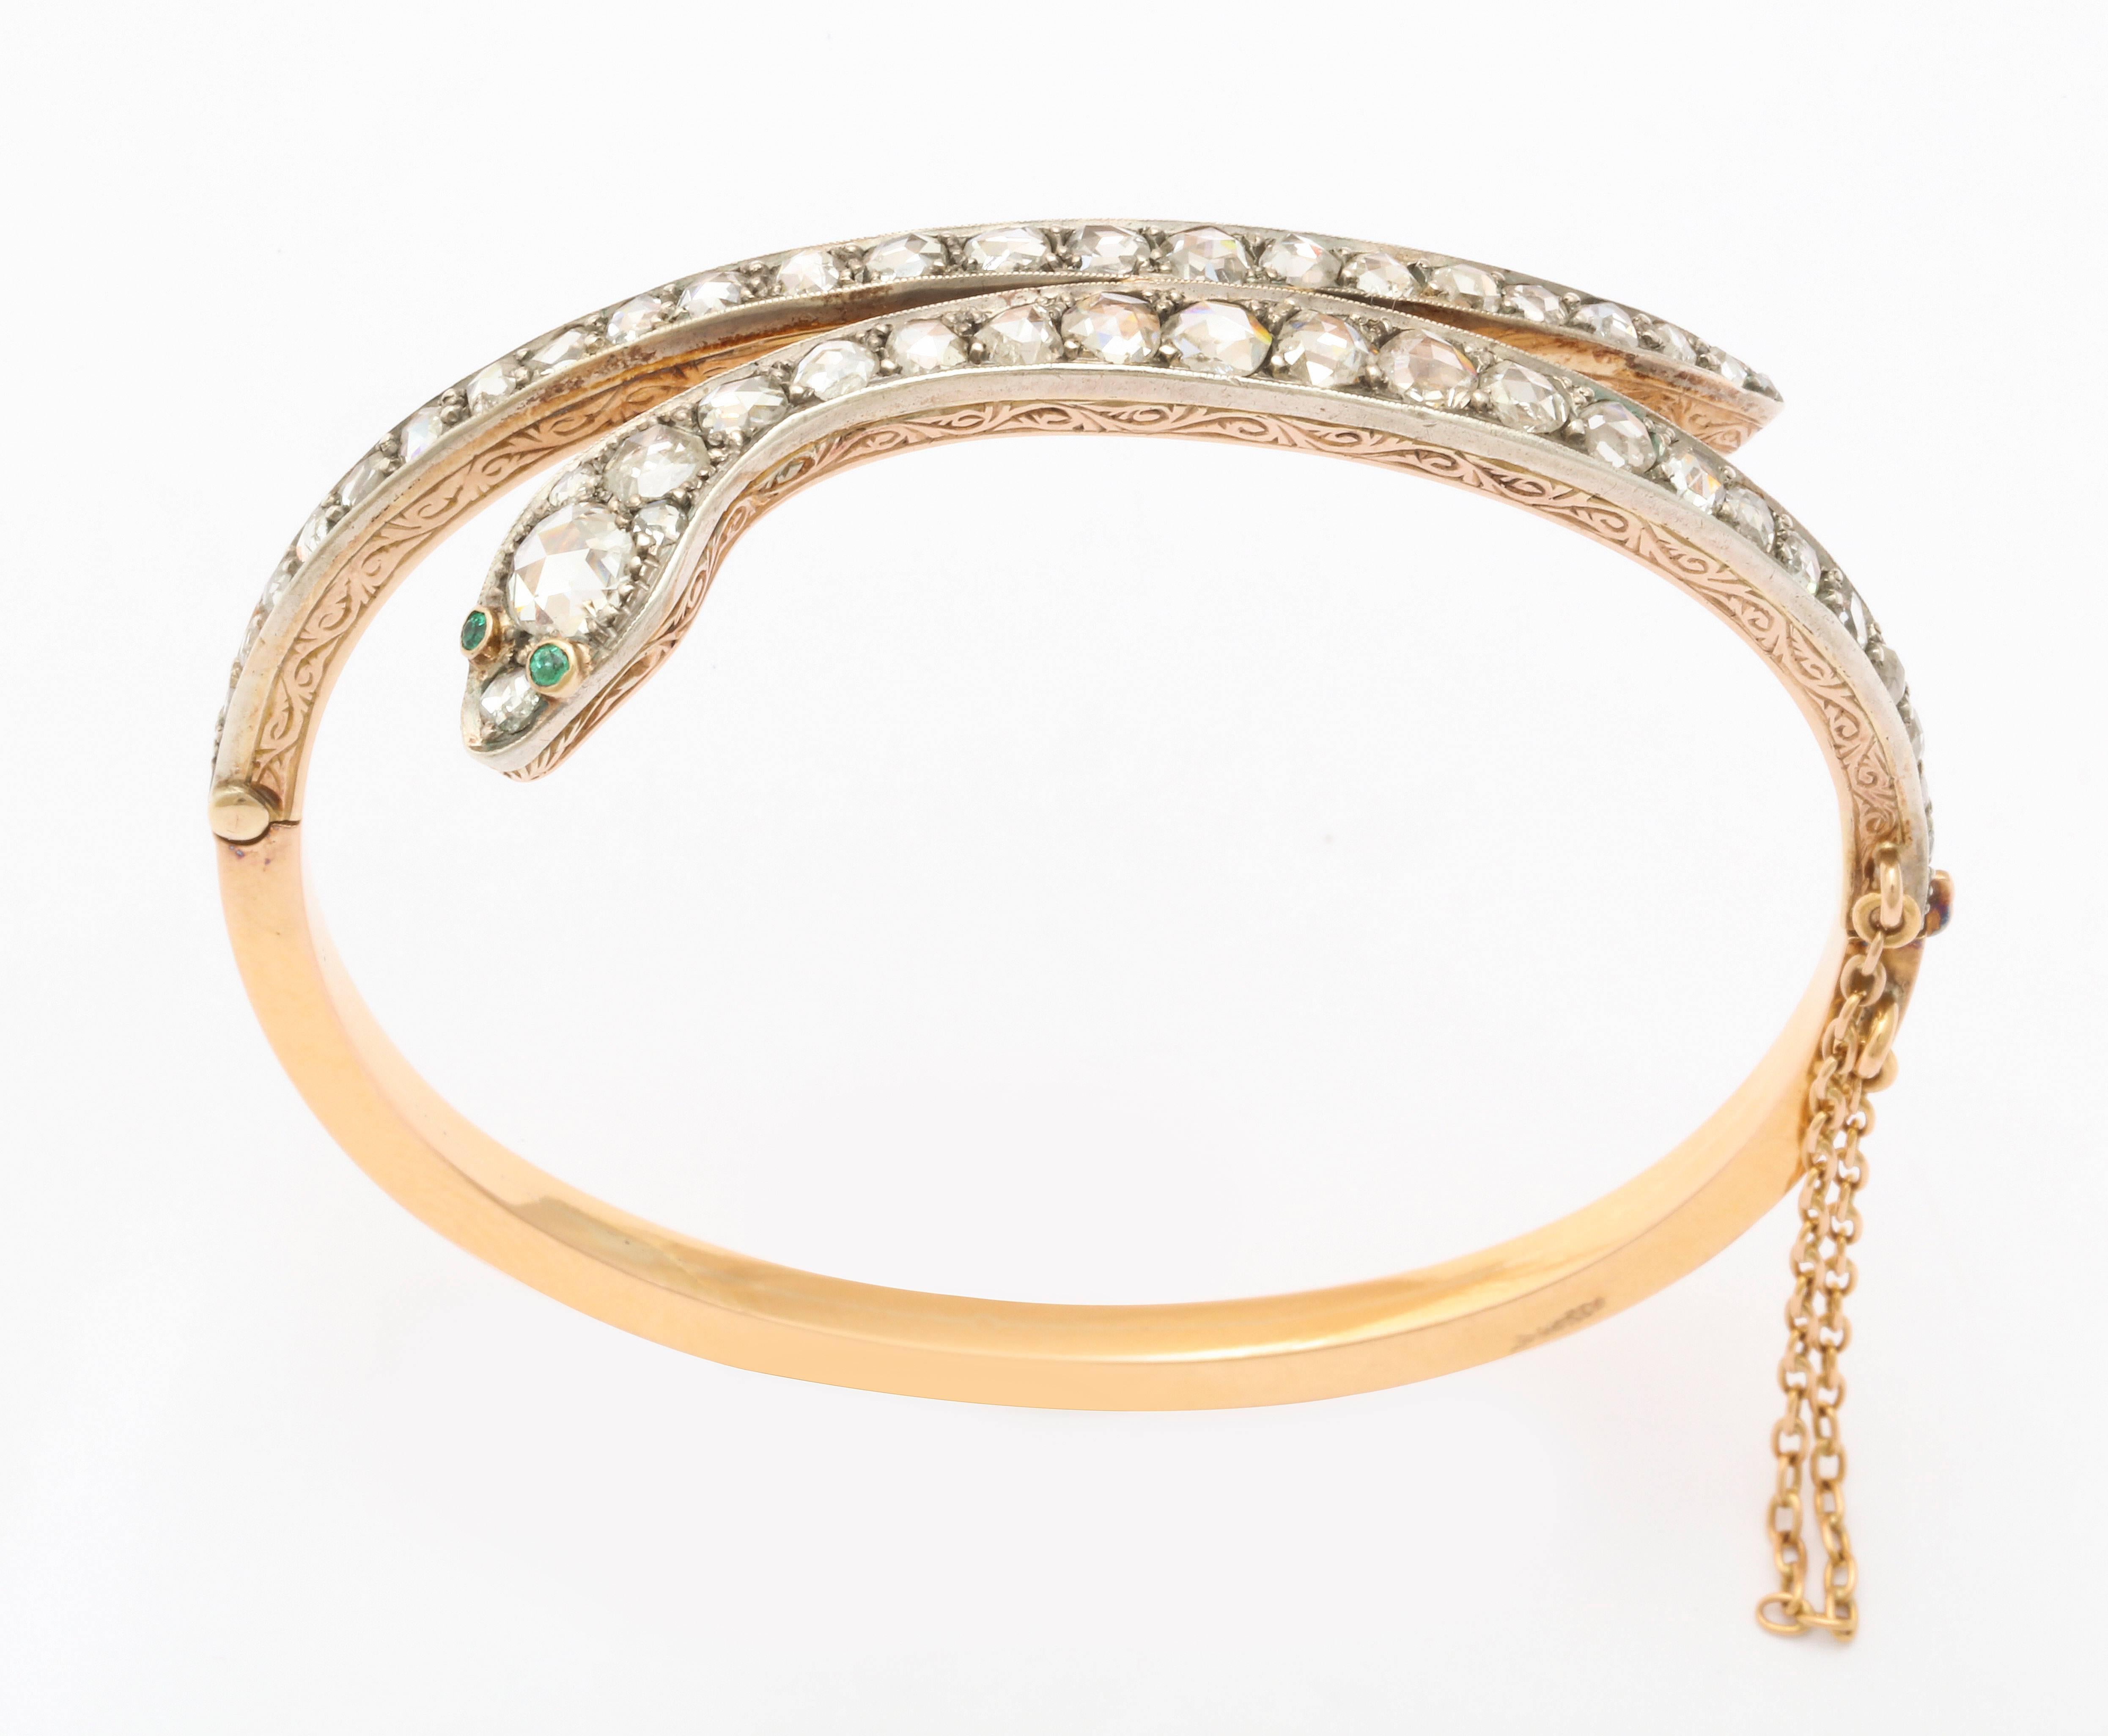 It is easy being Green when green eyes gaze at you from a diamond serpent bracelet of 15kt gold made in Victorian England c. 1860. The serpent cunningly wraps the wrist with the head and tail sections a glitter with antique diamonds. All stones are